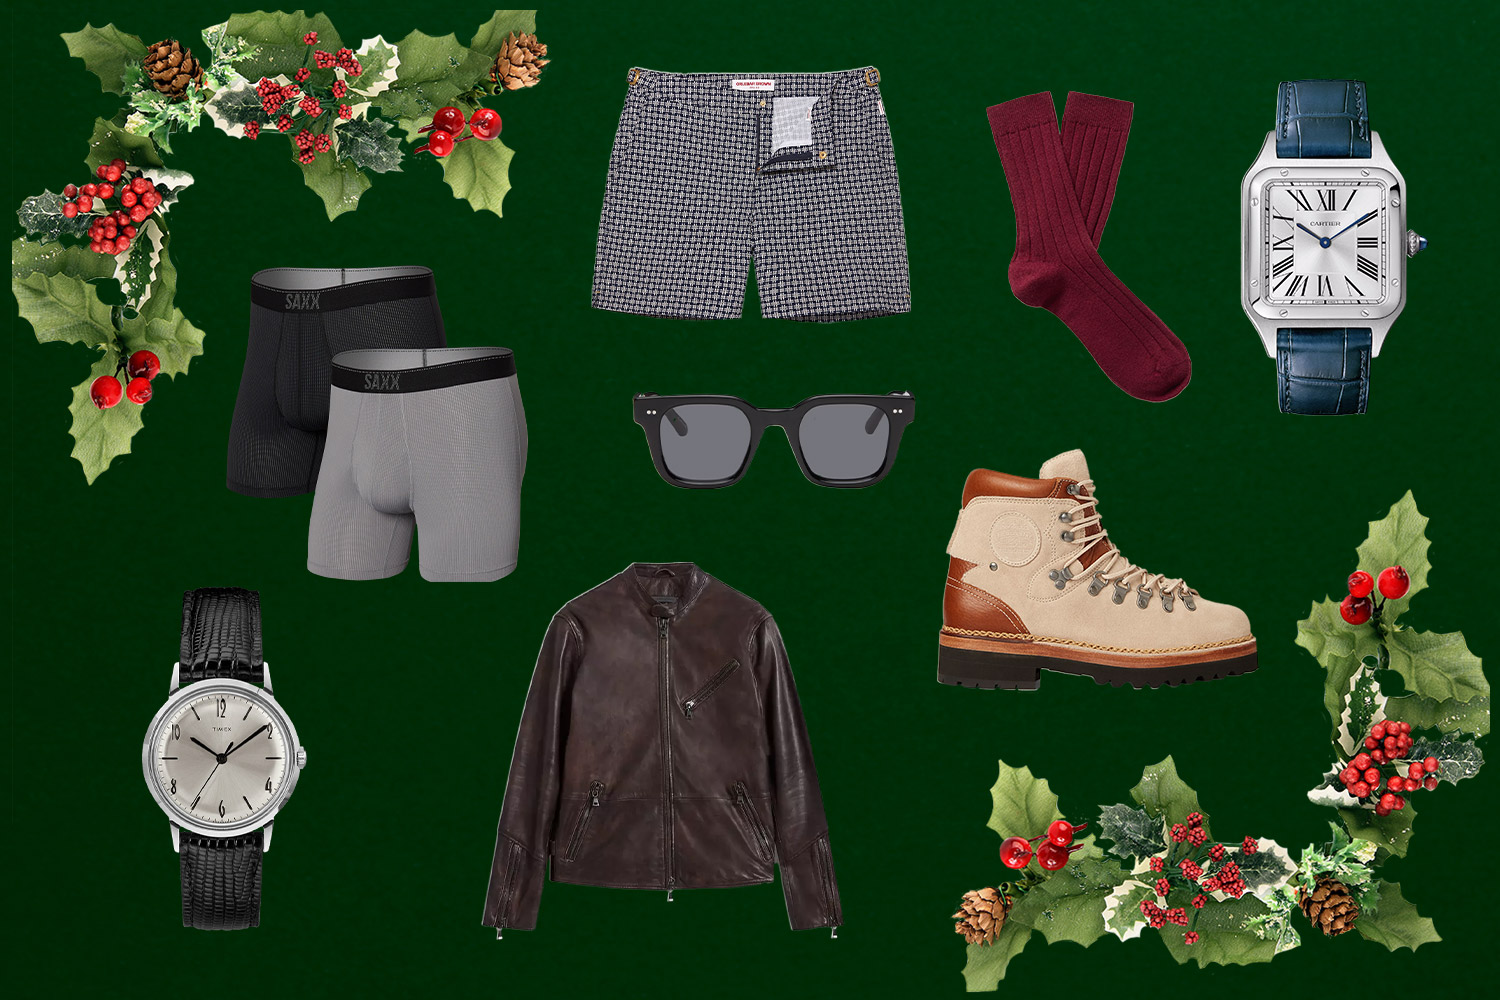 Various mens clothing items, shoes and accessories on a green background